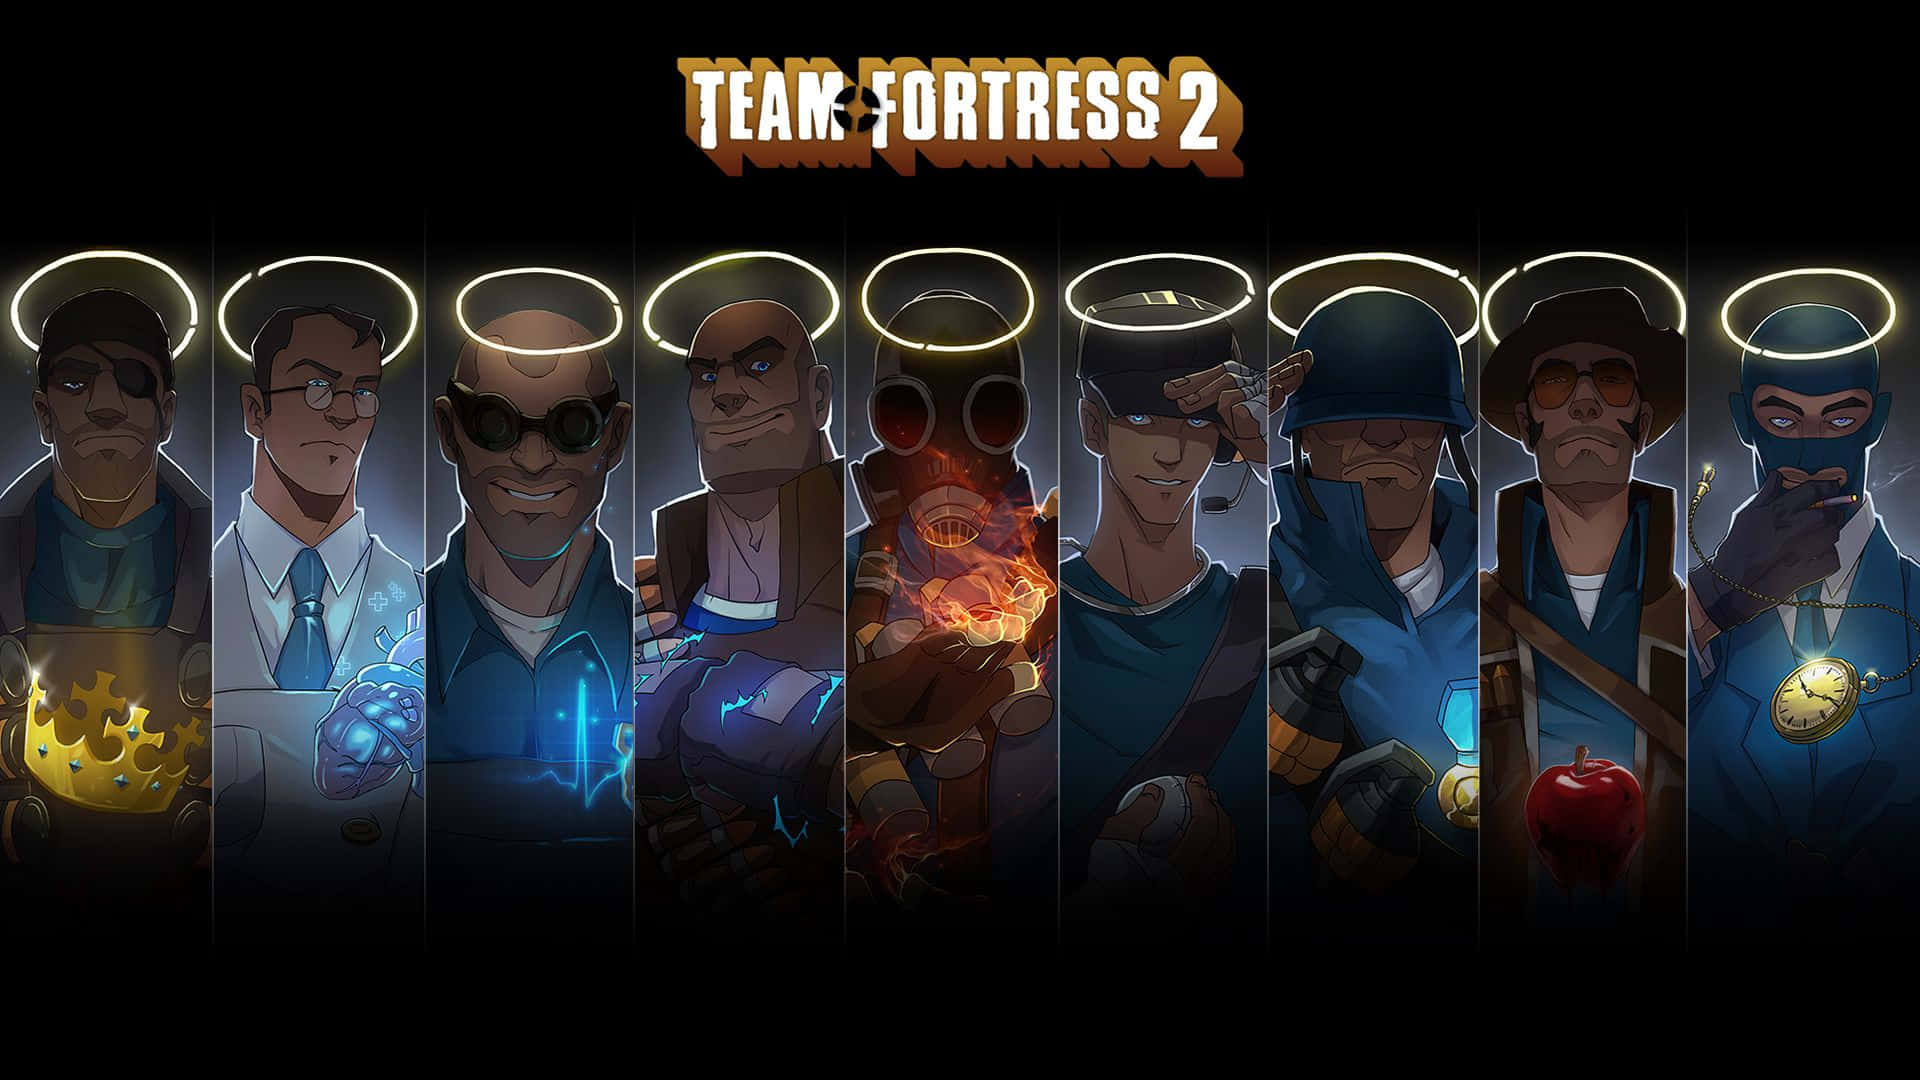 Team Fortress 2: It's the unforgettable classic shooter.